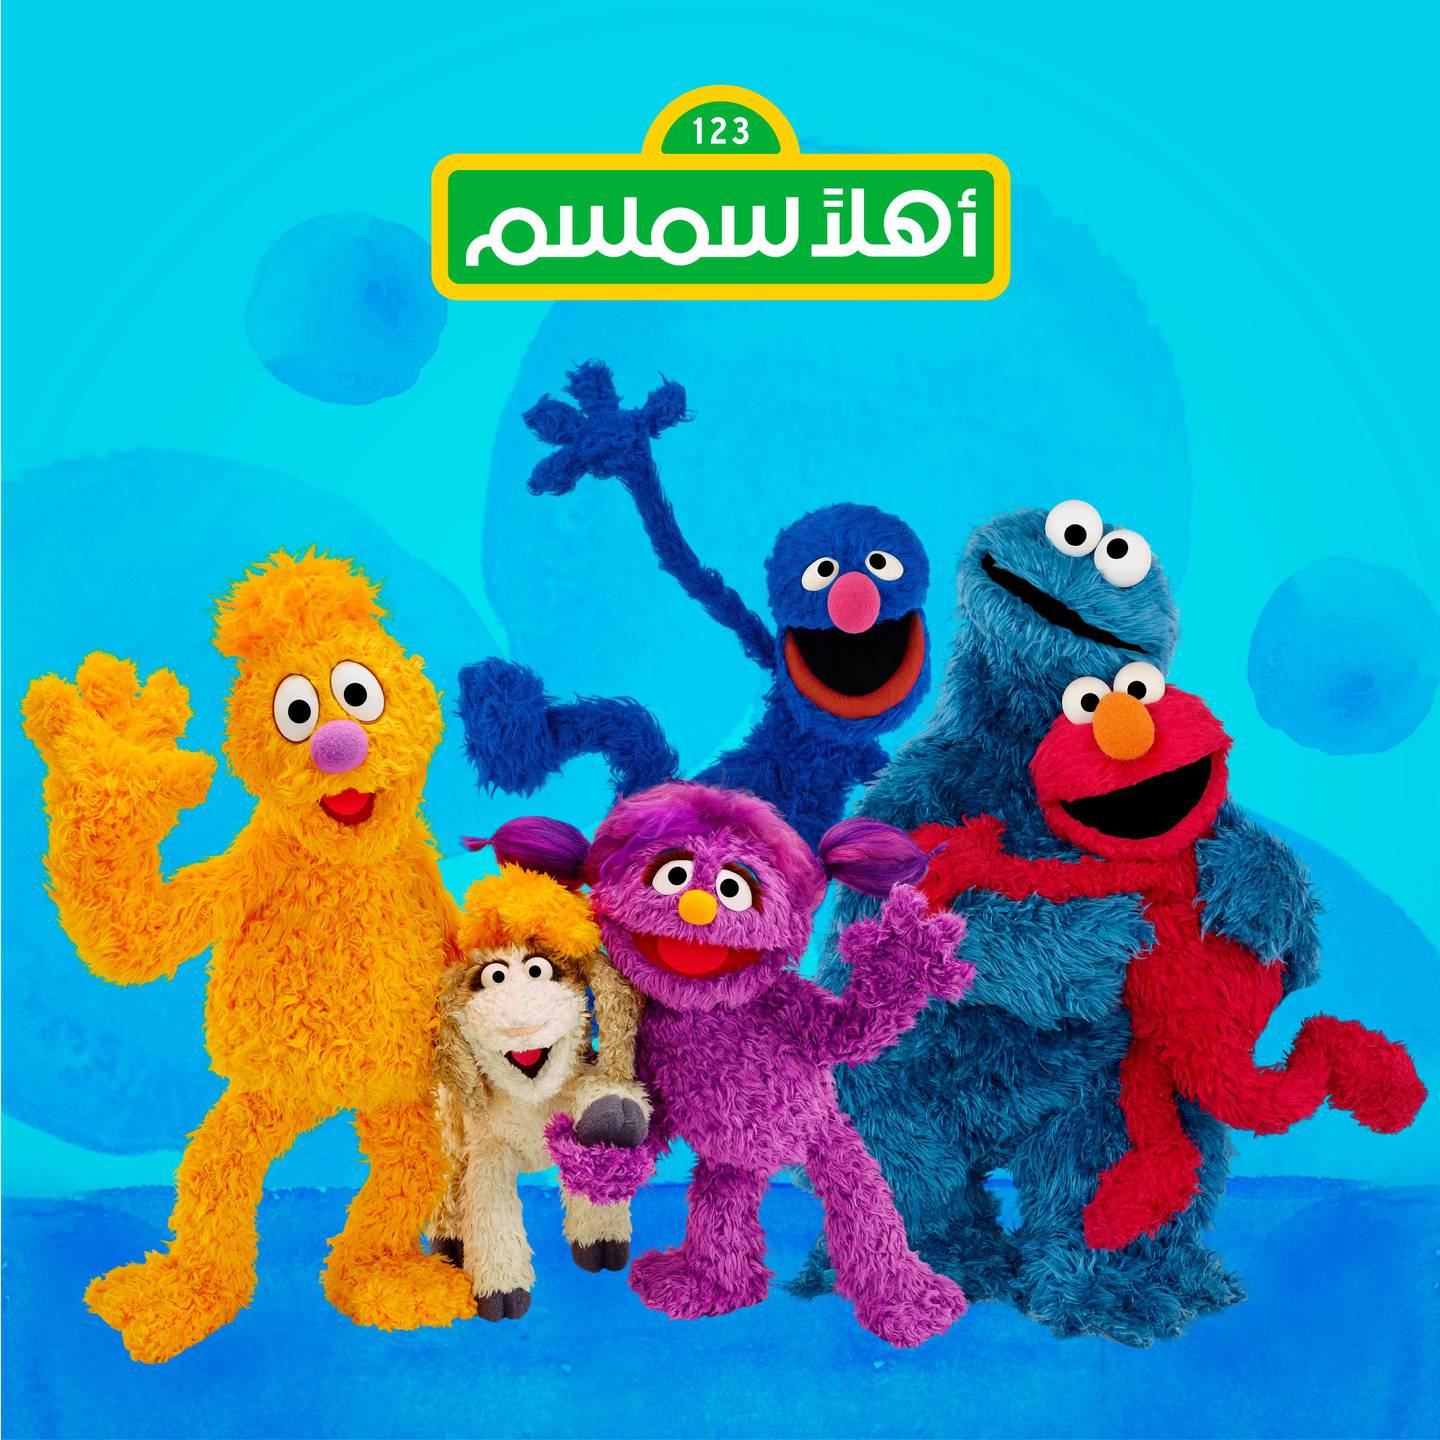 This image released by Sesame Workshop shows characters, from left, Jad, Ma'zooza, Basma, grover, background center, Cookie Monster and Elmo. Sesame Workshop  the nonprofit, educational organization behind Sesame Street  has teamed up with the International Rescue Committee  to launch a new, locally produced Arabic TV program for the hundreds of thousands of children dealing with displacement in Syria, Iraq, Jordan and Lebanon. (Sesame Workshop via AP)